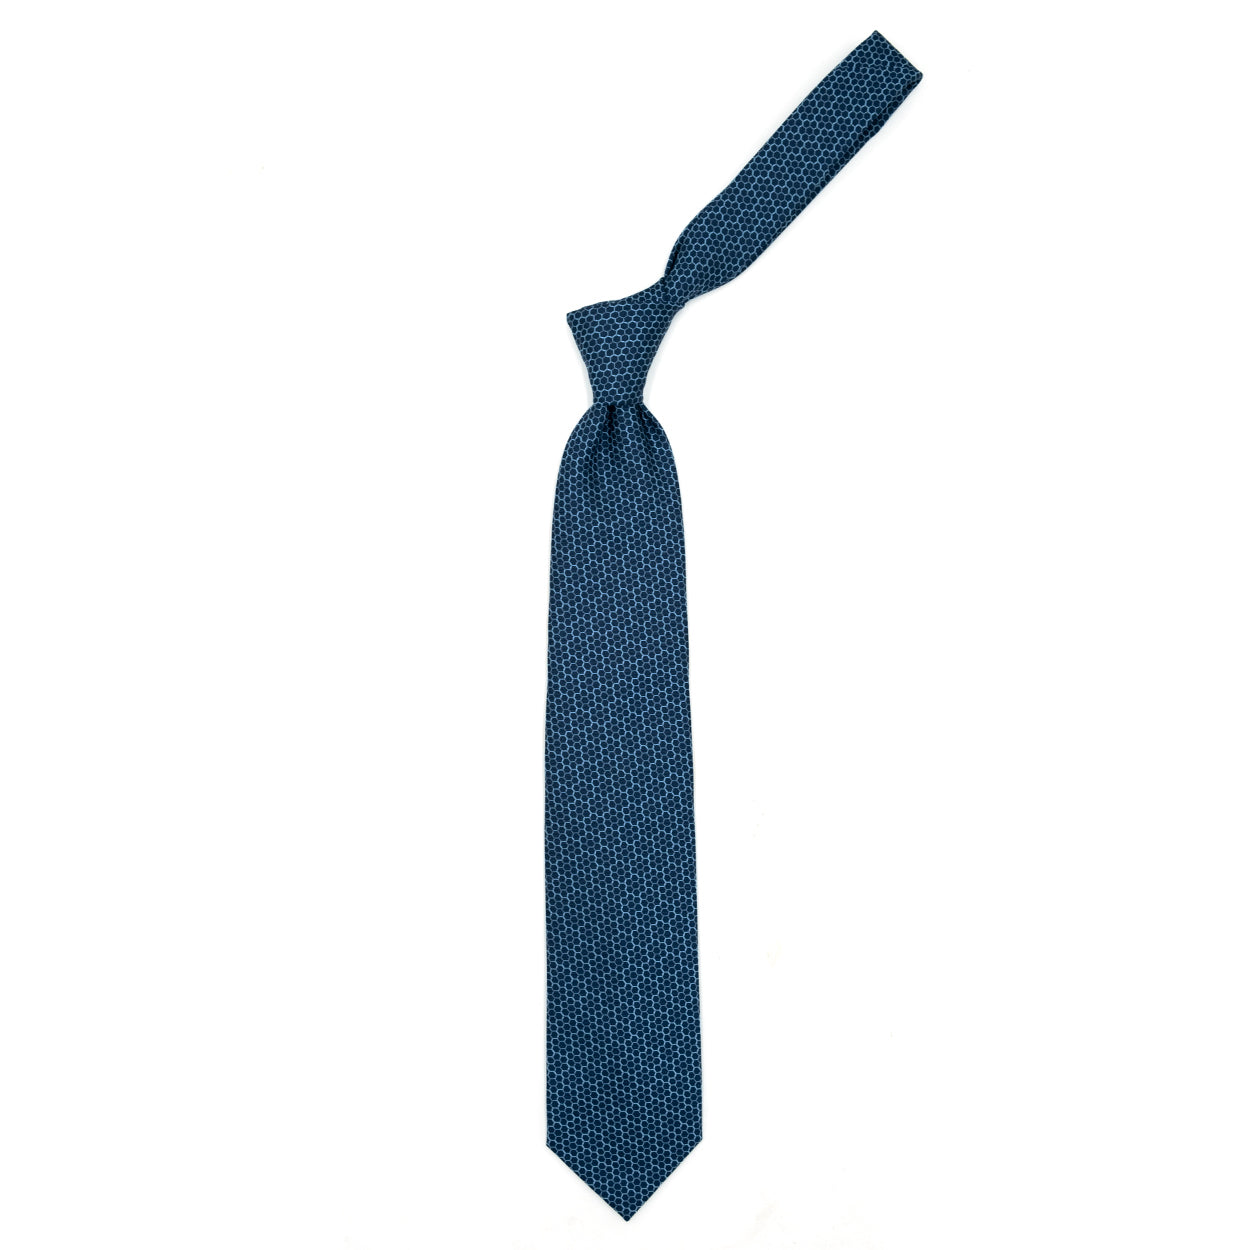 Blue tie with blue circles